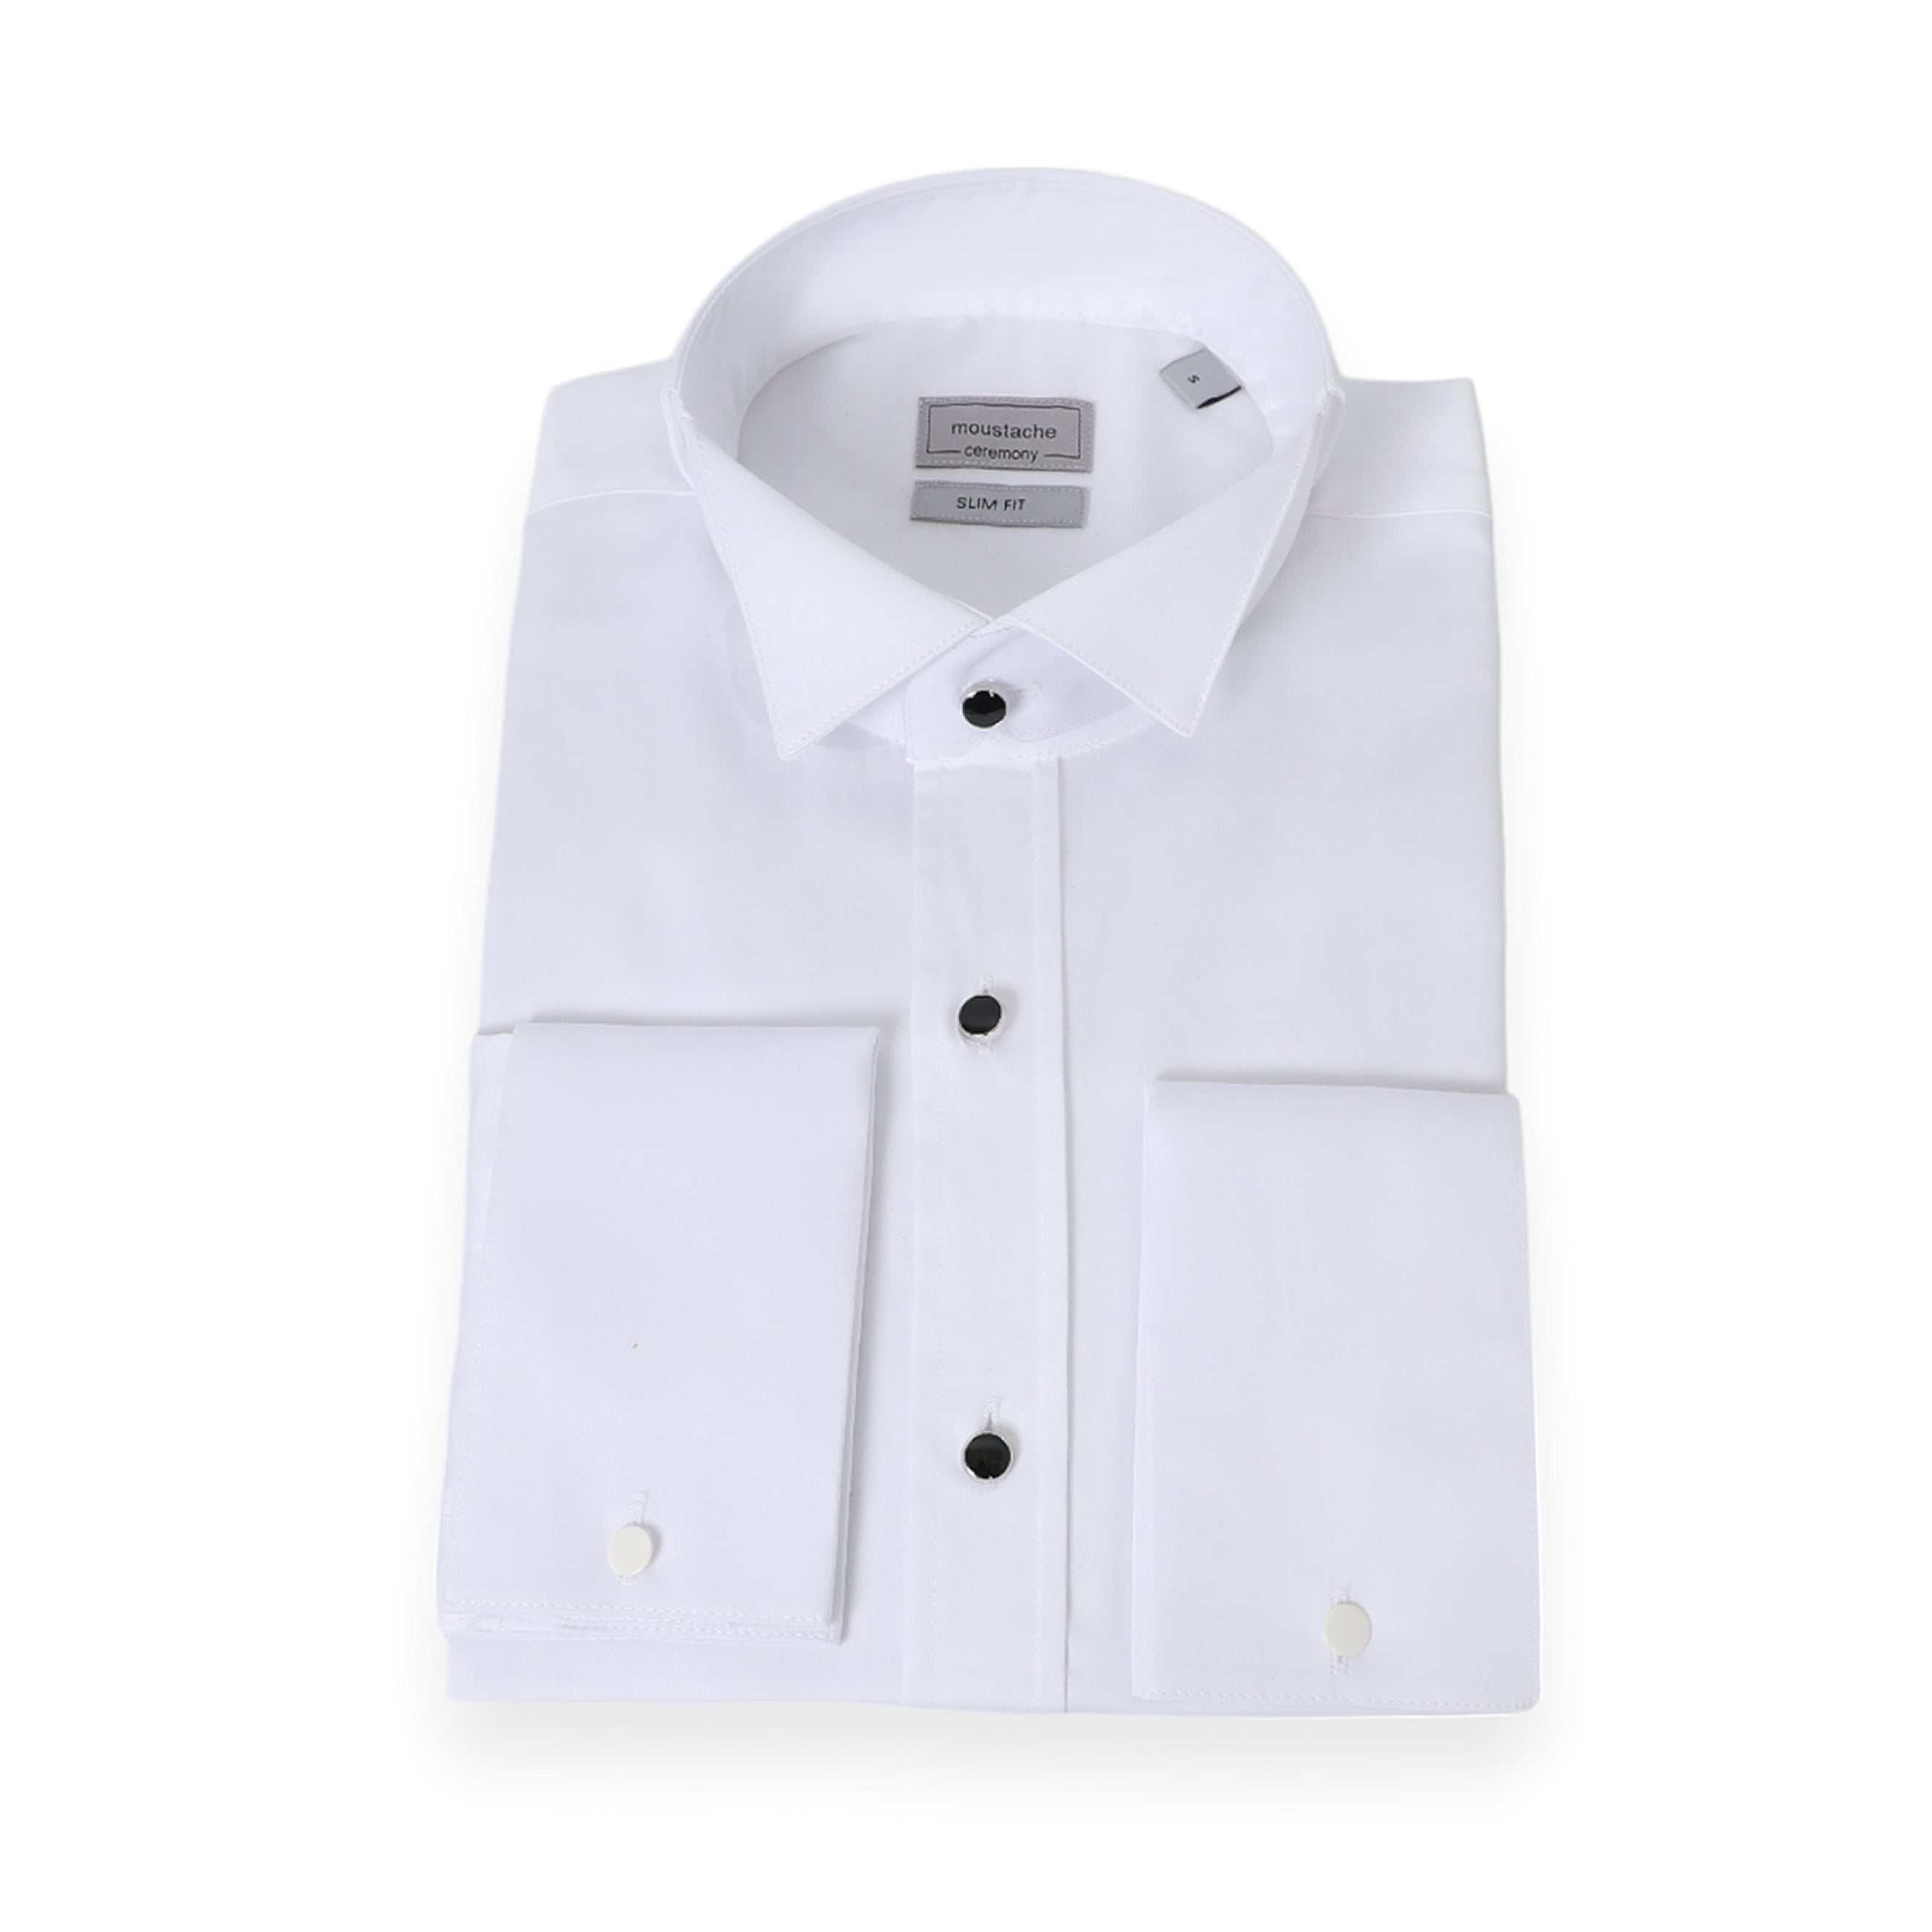 White Tuxedo Shirt Slim Fit with wing collar